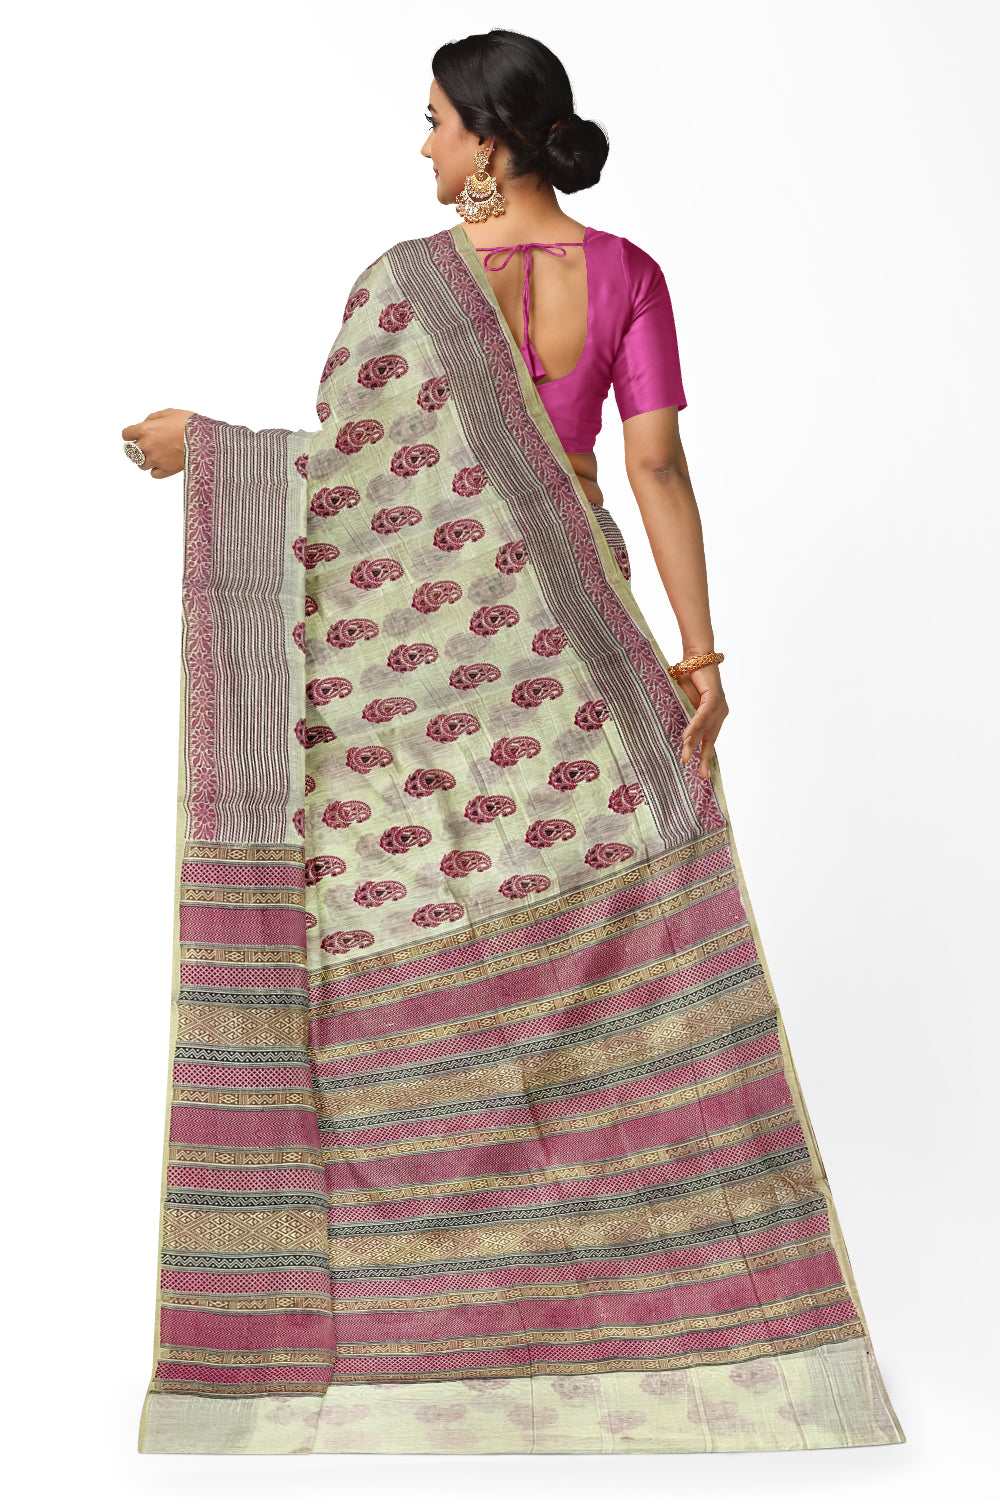 Southloom Cotton Light Brown Saree with Magenta Paisley Prints